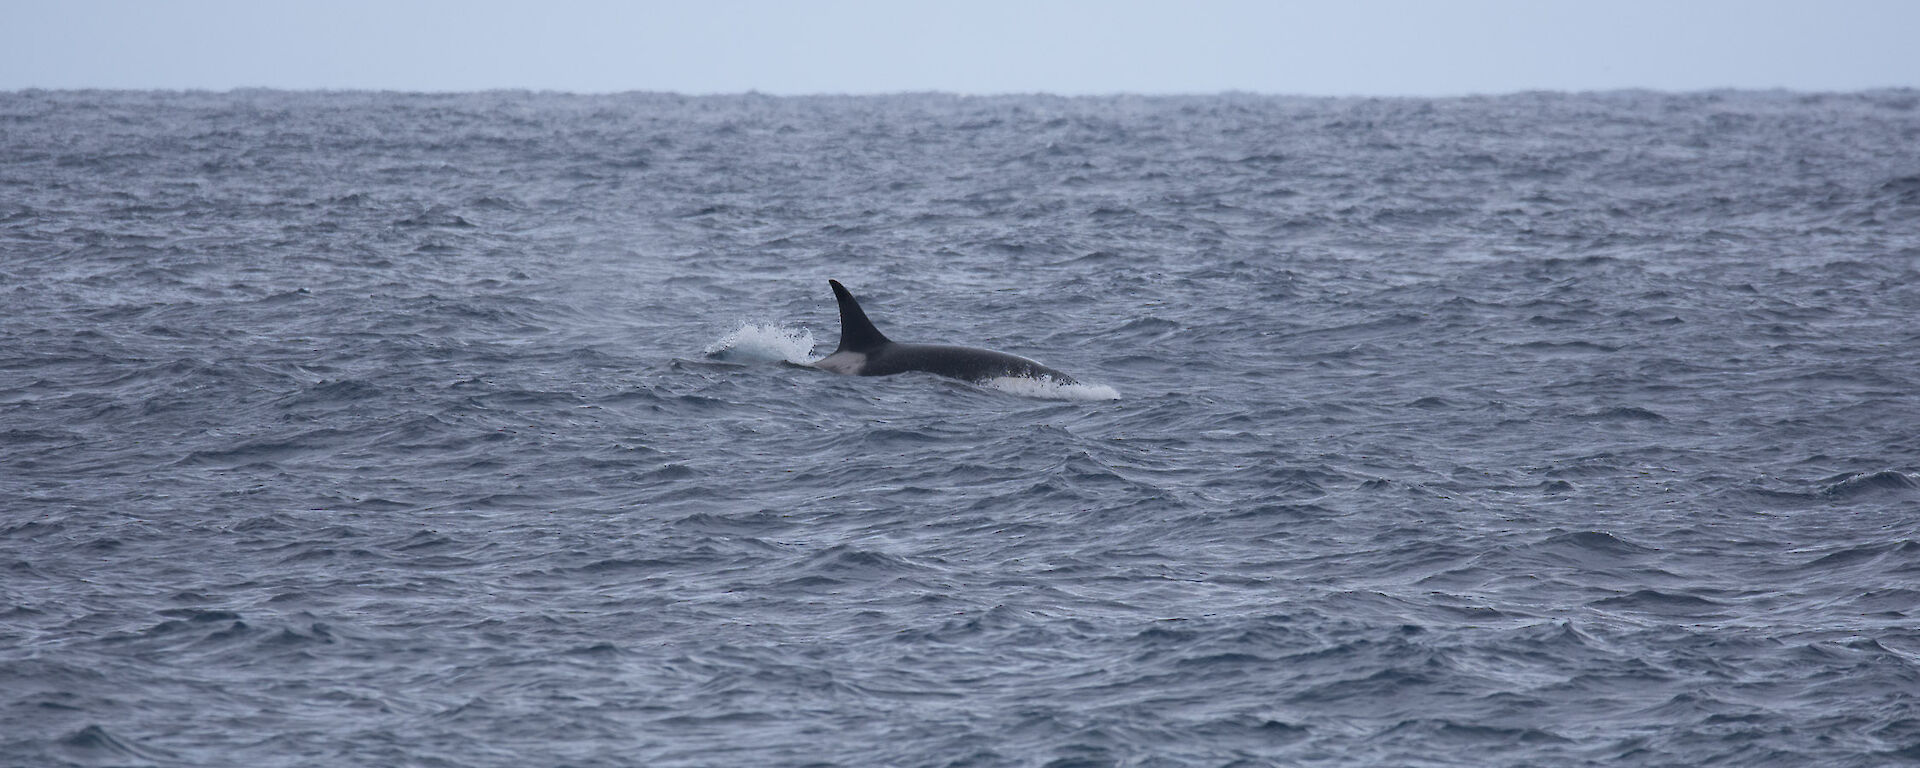 A picture of a Orca with its fin and body out of the water spotted off North Head